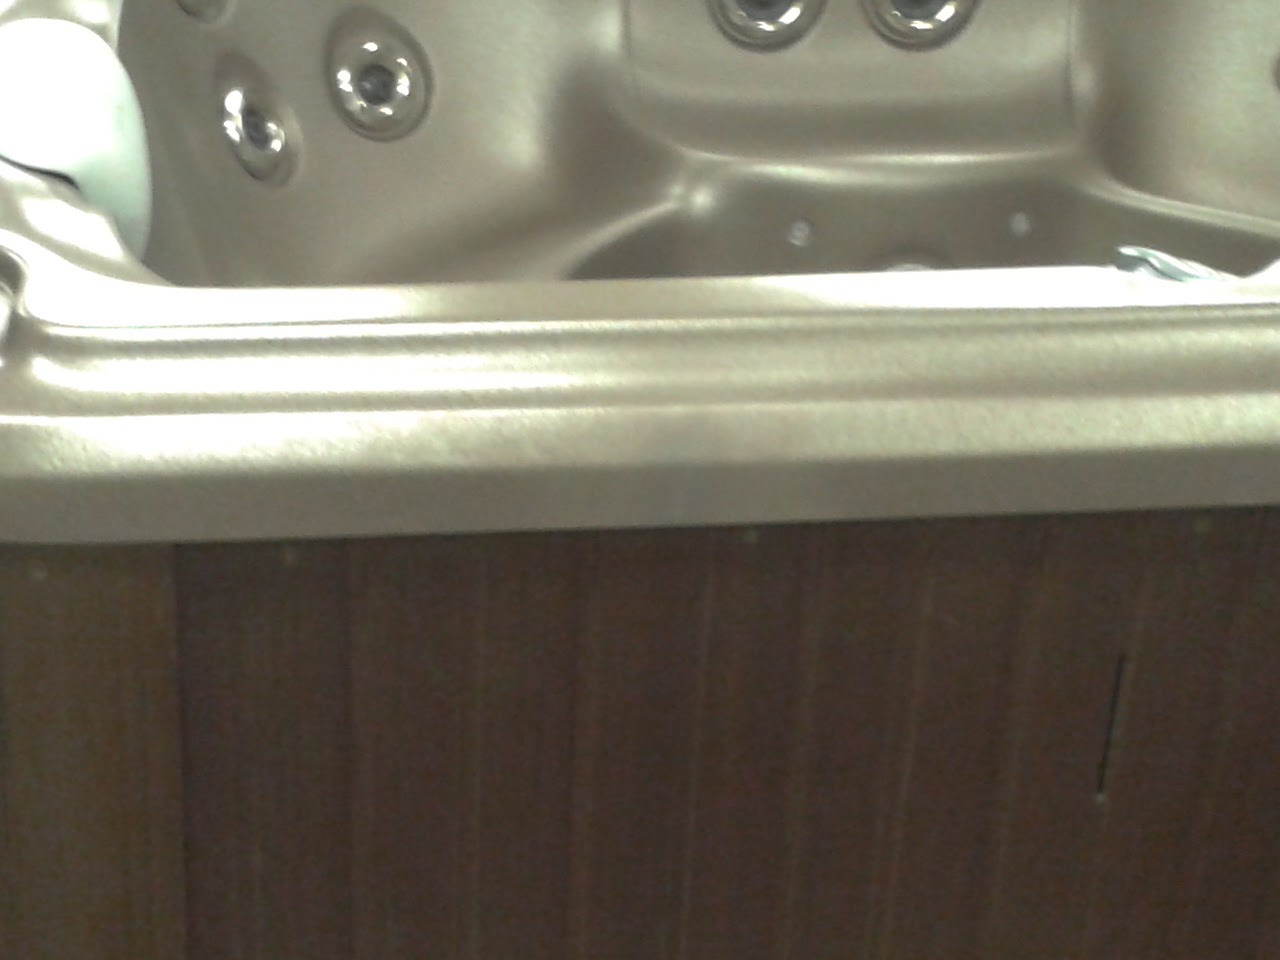 Hot tub with a large crack is color matched and repaired with fiberglass and acrylic methods to a brand new finish